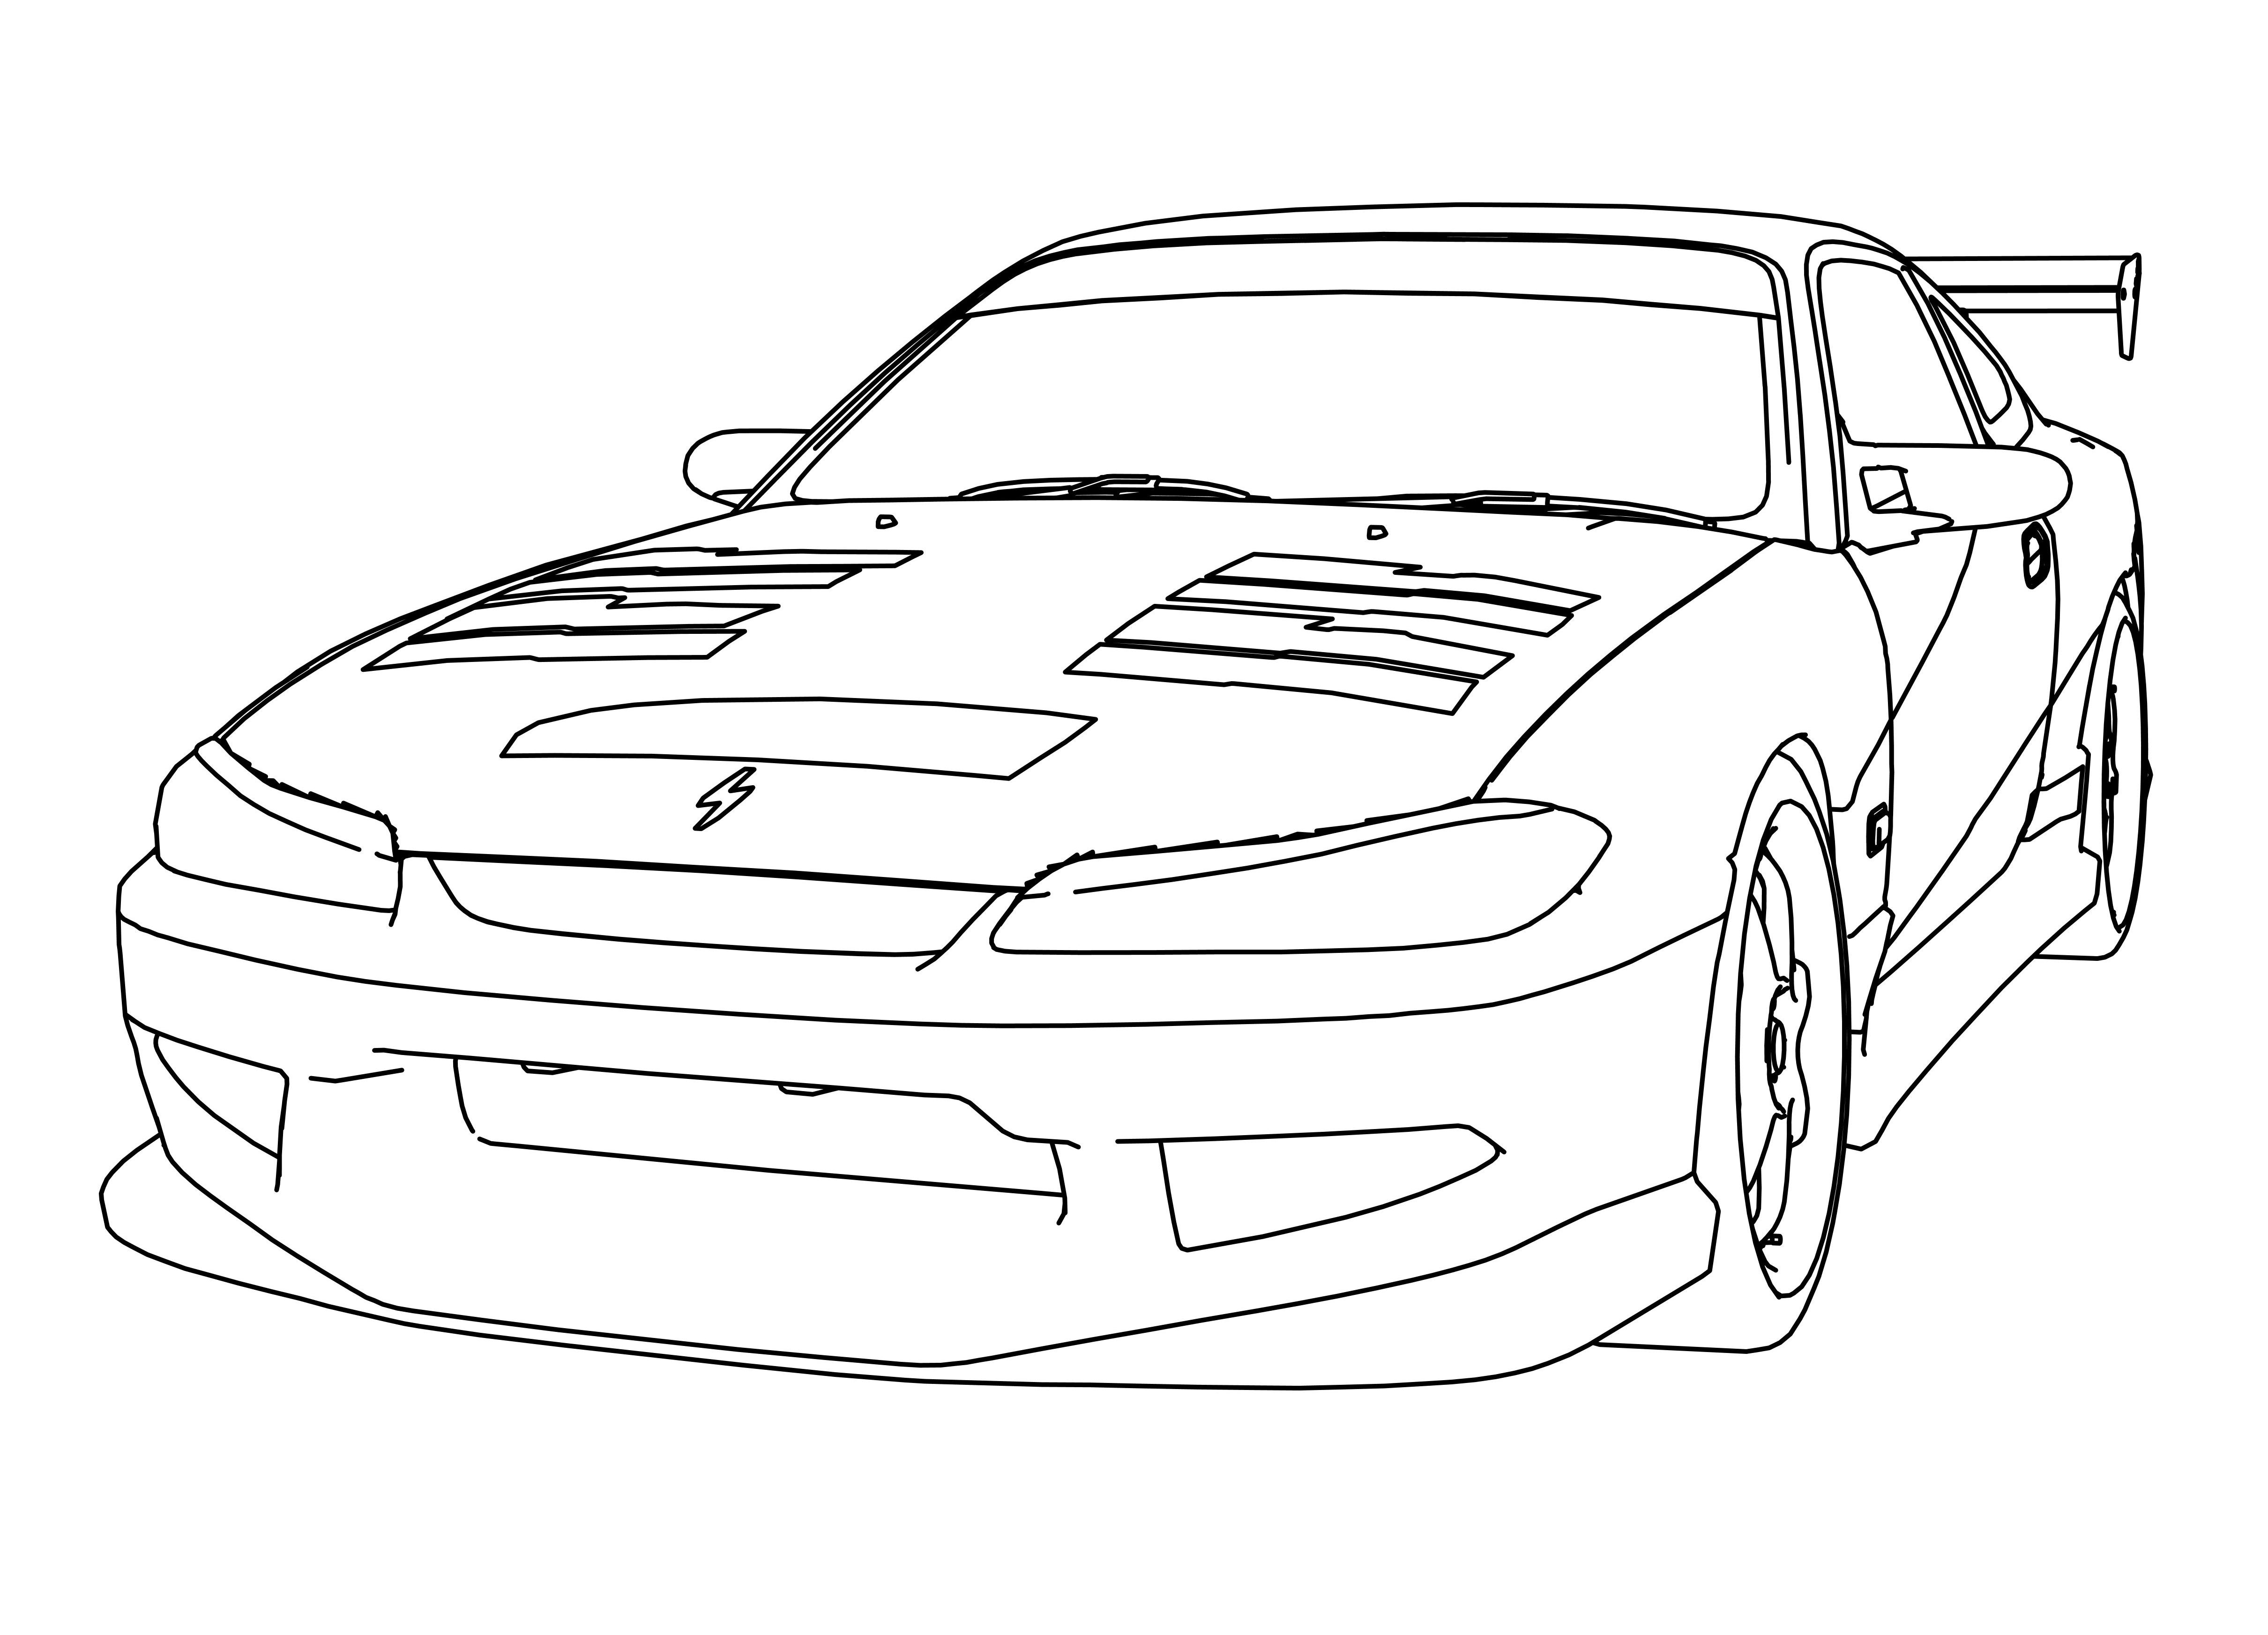 Nissan Silvia S15 Spec S Coloring Page | Wecoloringpage.com